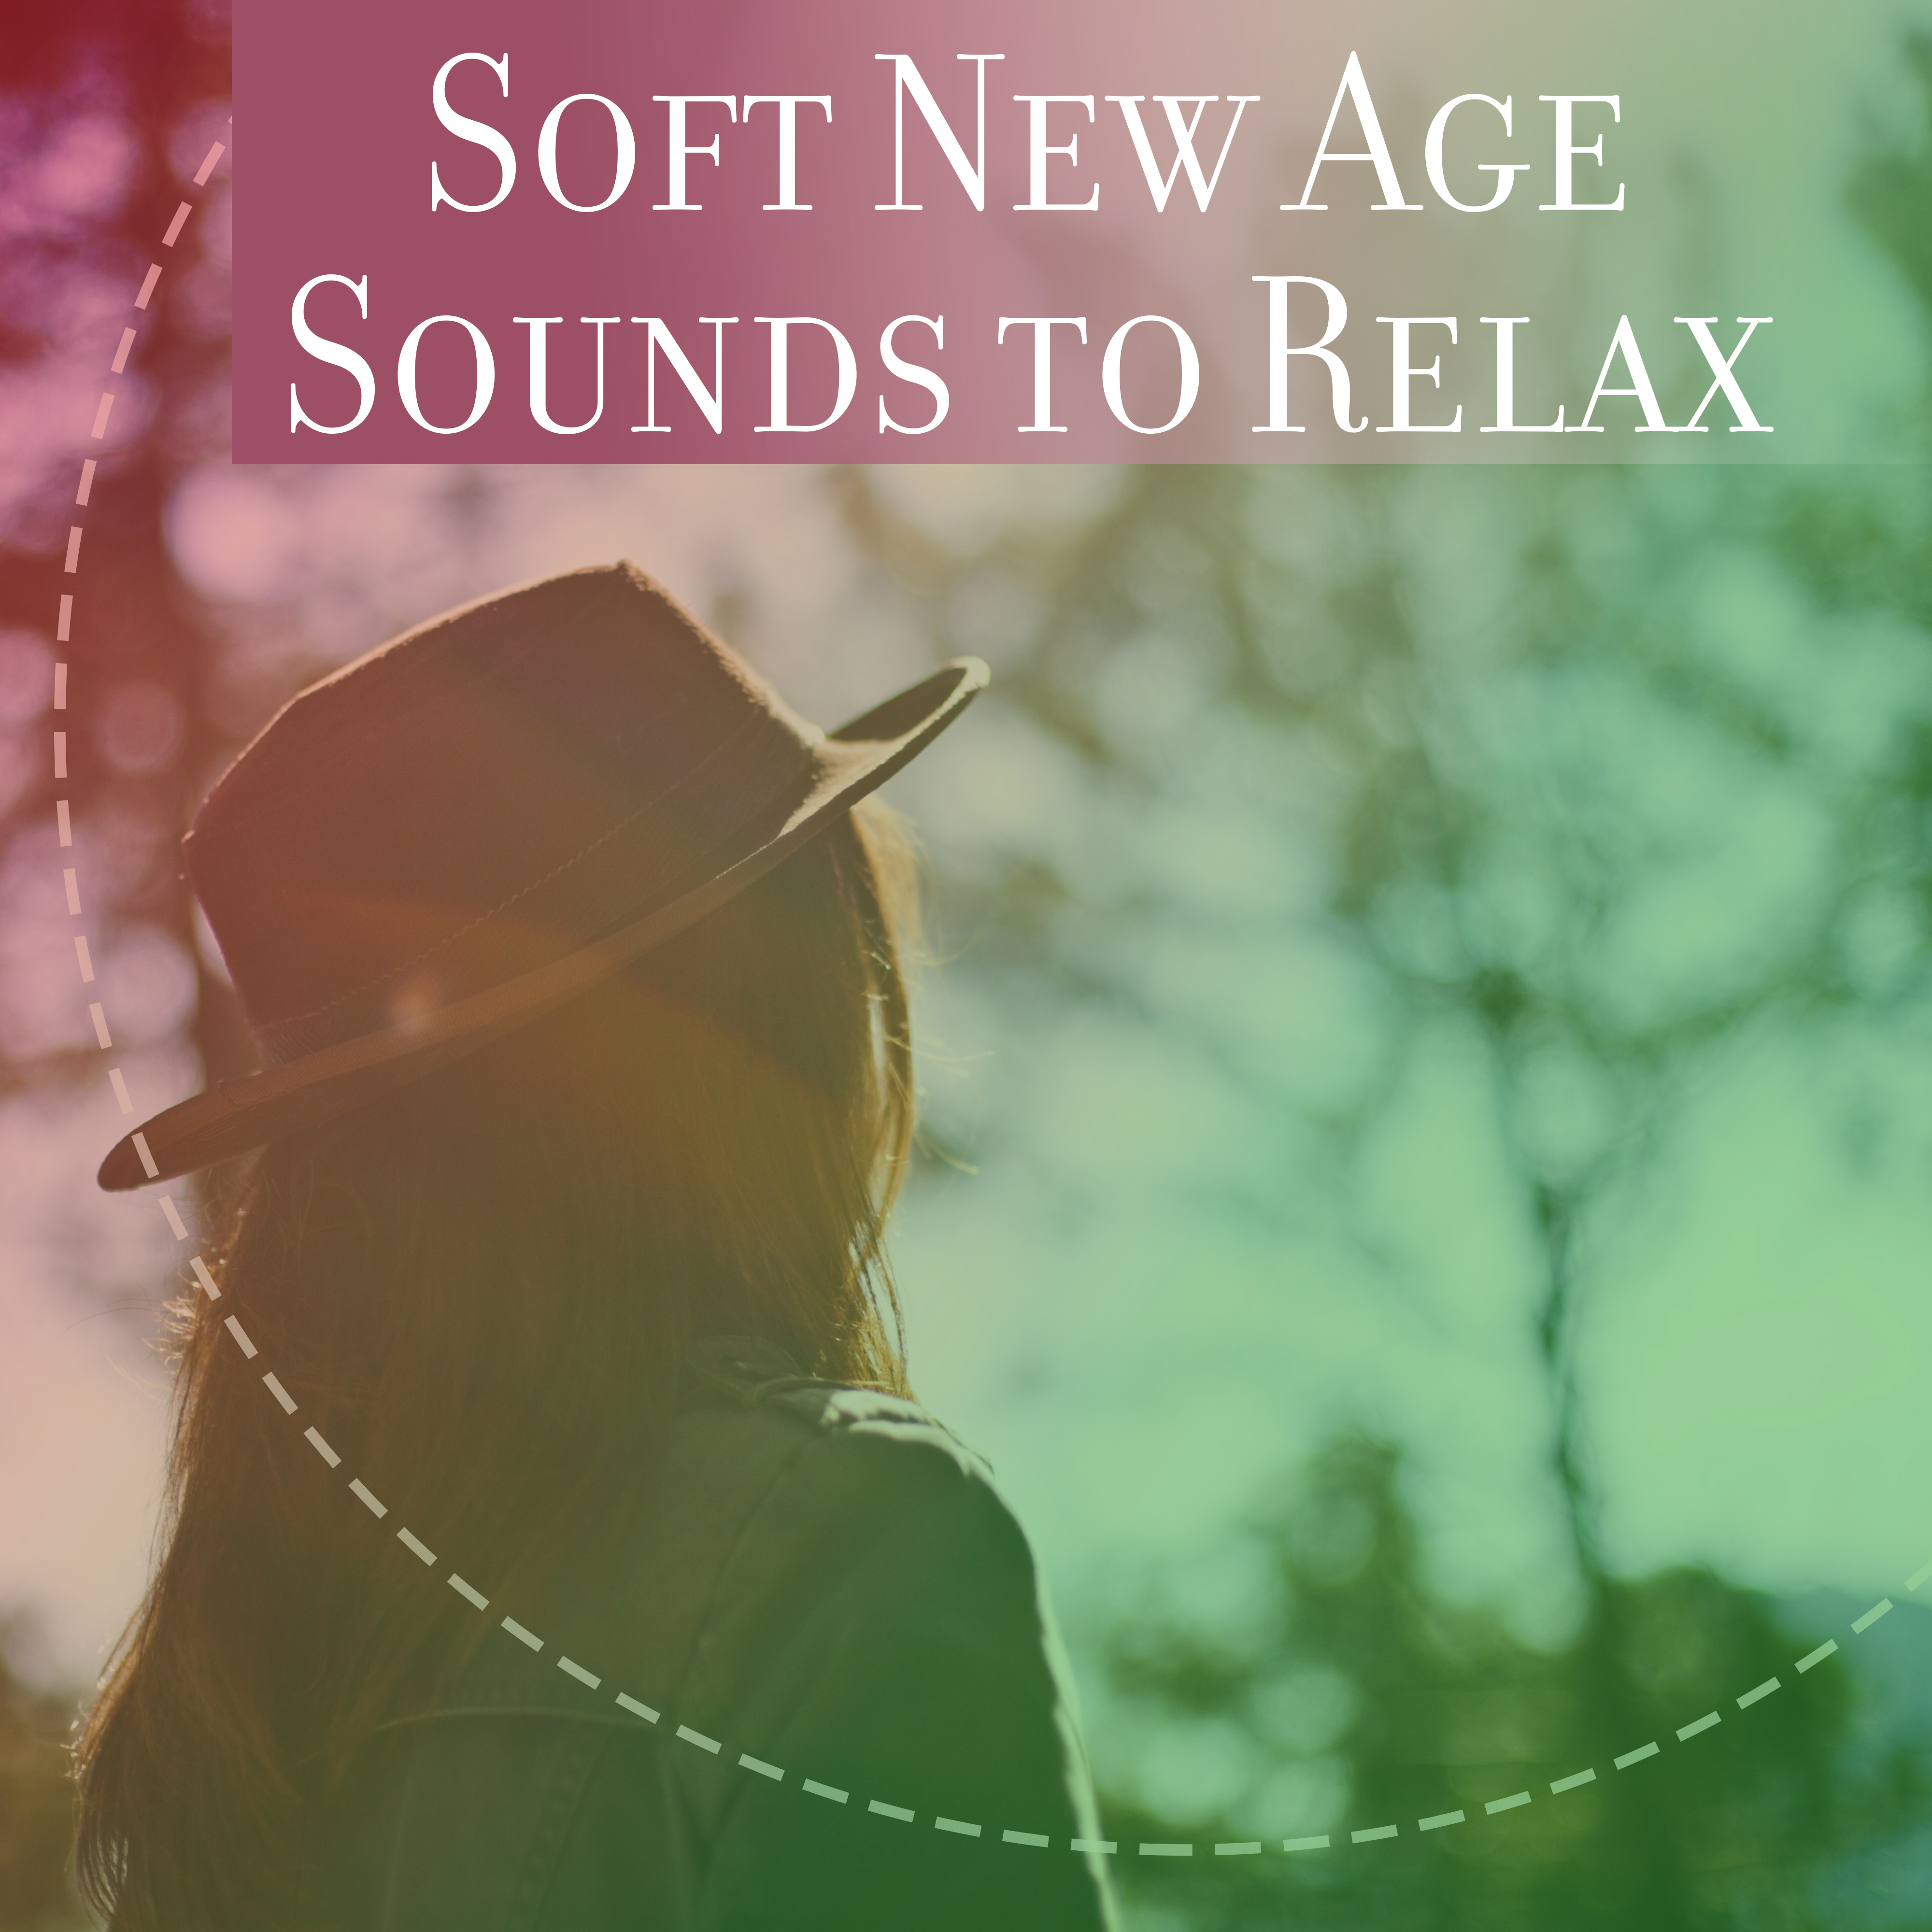 Soft New Age Sounds to Relax – Stress Relief, Calm Sounds, Easy Listening, Soothing Waves